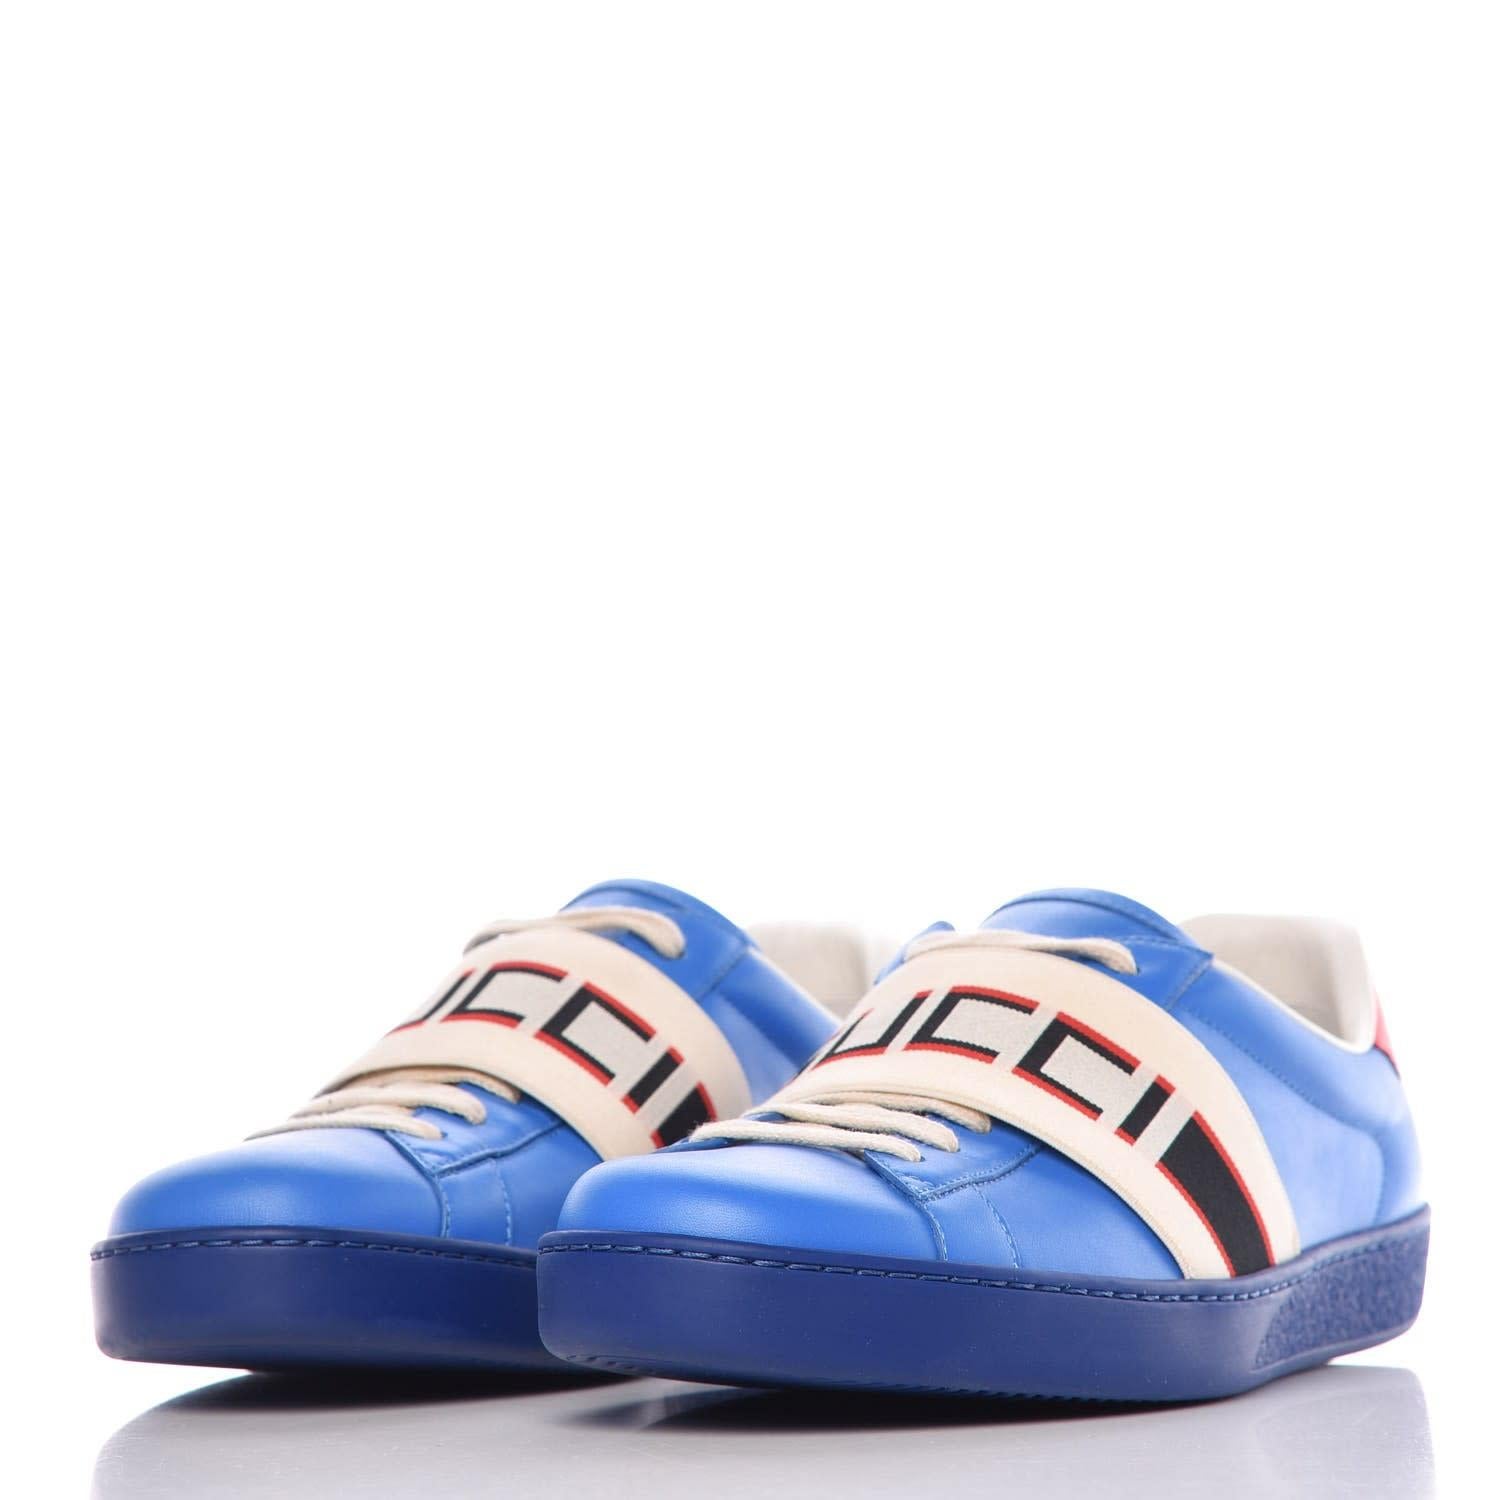 Calfskin Stripe Lace Up Sneakers 10 Blue Red. These Gucci sneakers are made of blue leather with a Gucci logo stripe over the laces and a red top line heel.

COLOR: Blue 
MATERIAL: Leather
ITEM CODE: 523469
SIZE: 43 EU / 10 US
EST. RETAIL: